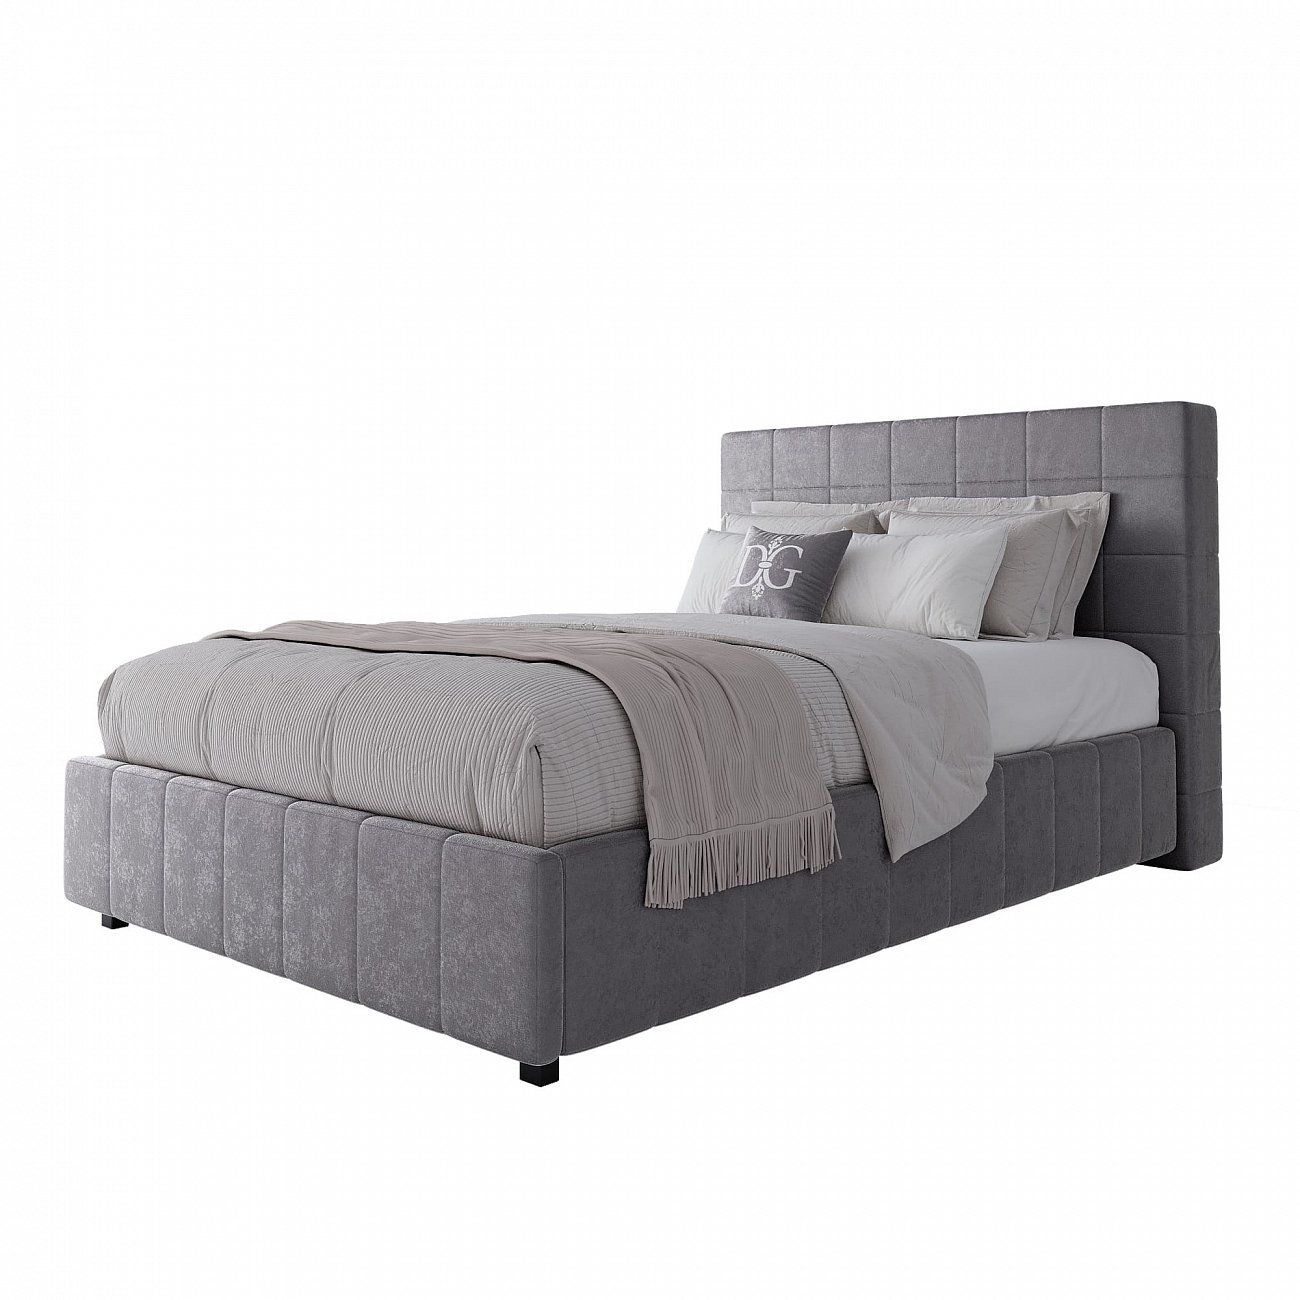 Teenage bed with a soft backrest 140x200 cm gray-beige Shining Modern